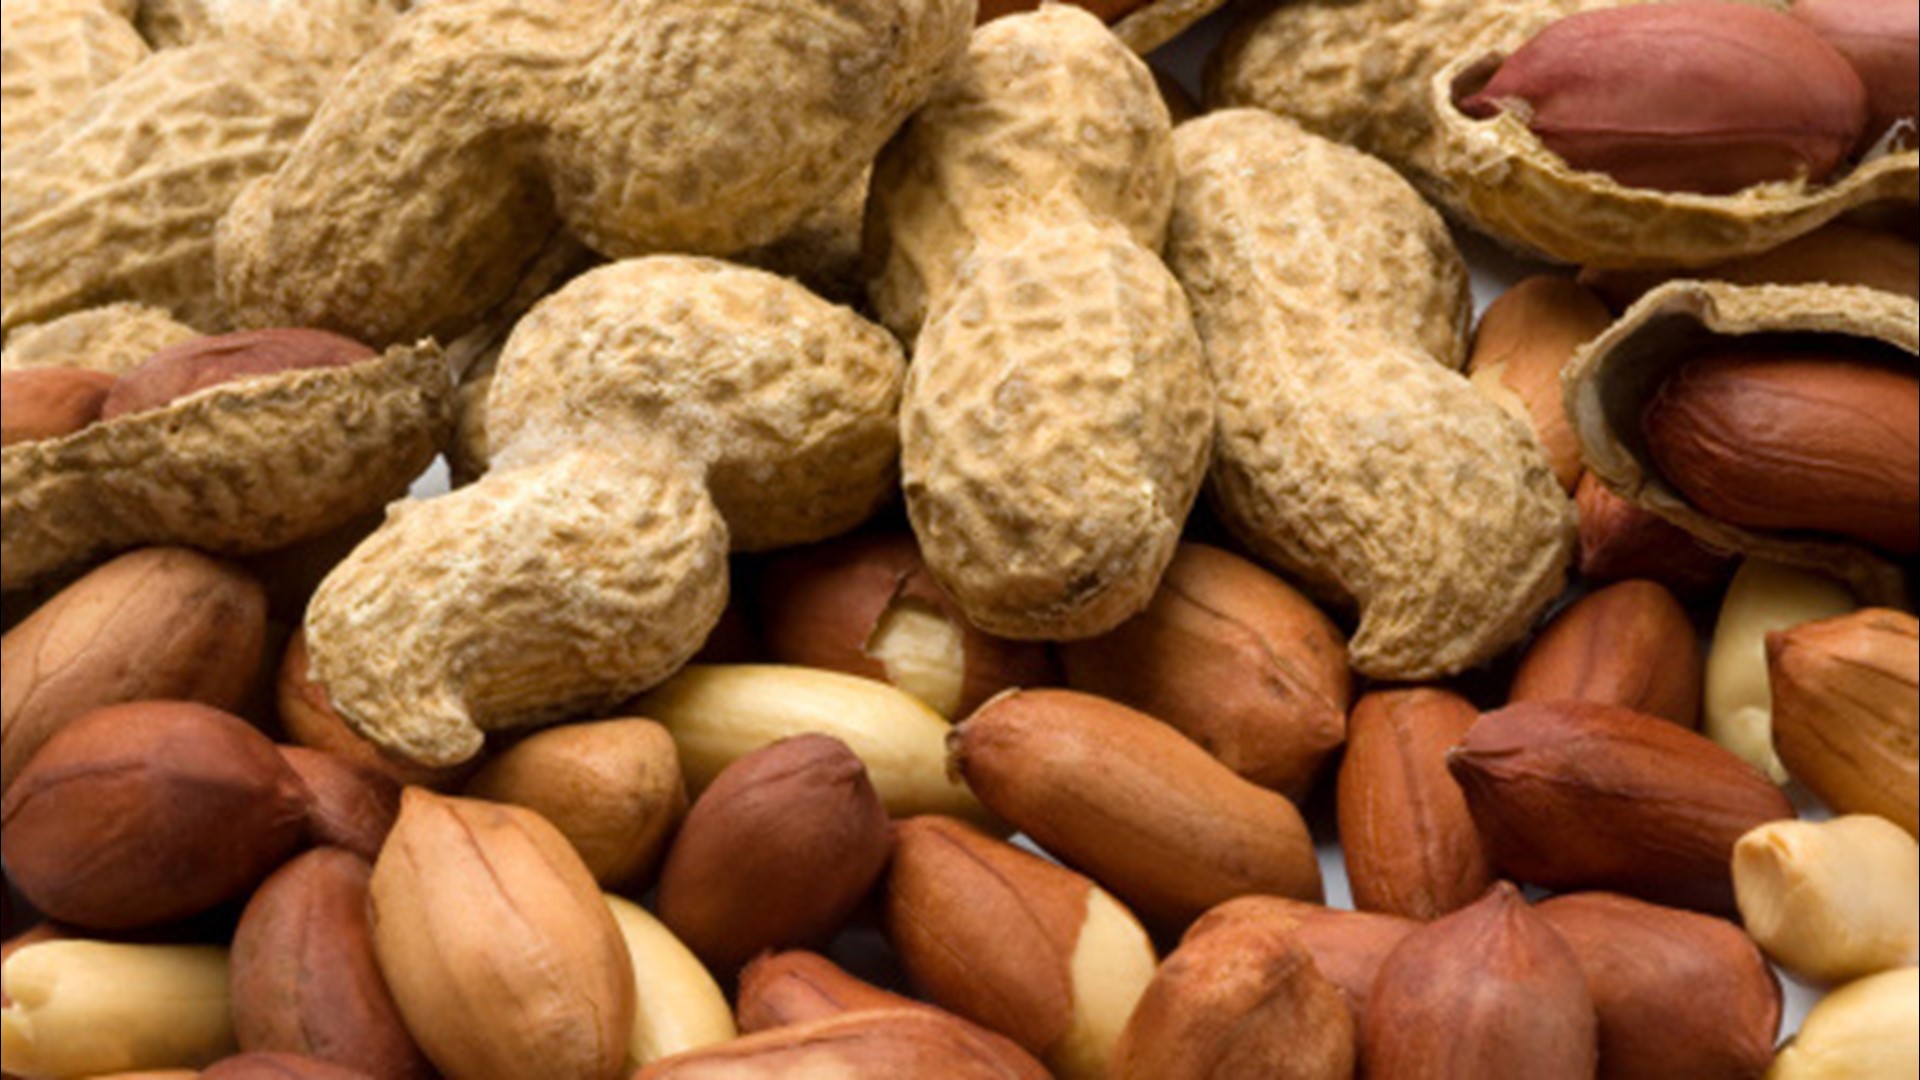 Millions of people suffer from severe peanut allergies their entire lives. Now an experimental treatment could bring needed relief to those in need.